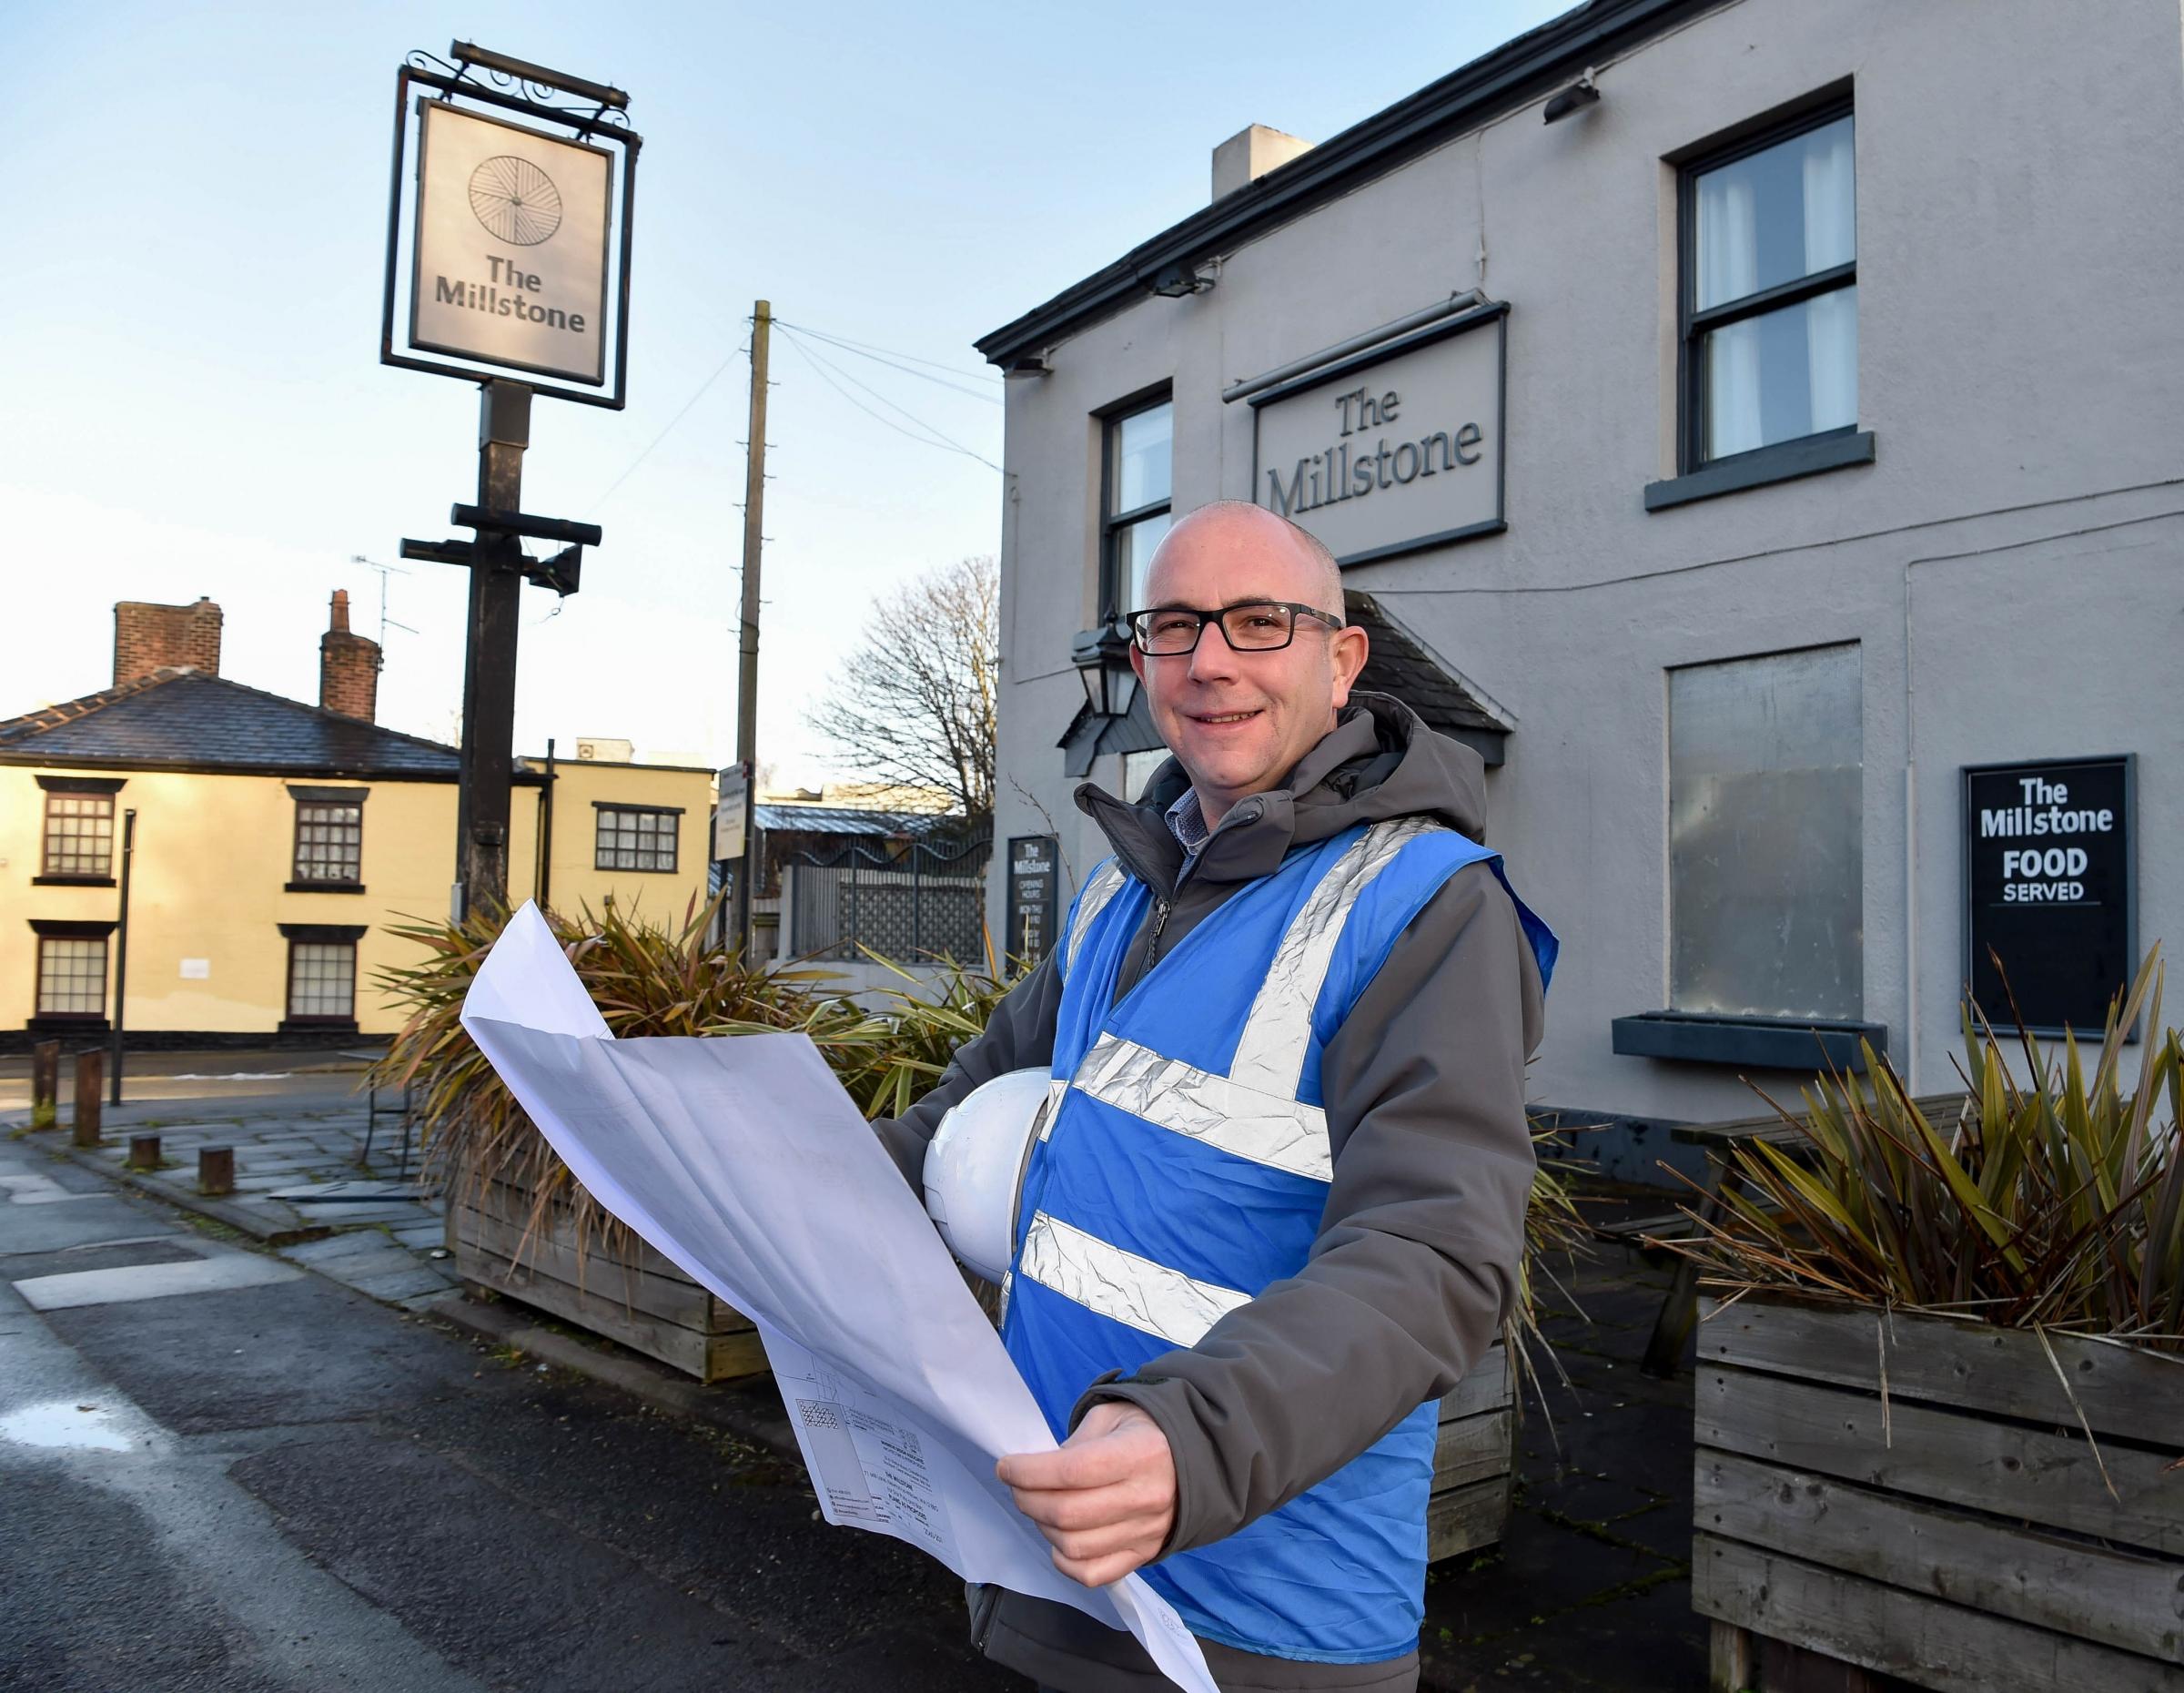 Star Pubs & Bars area manager David OBrien outside The Millstone